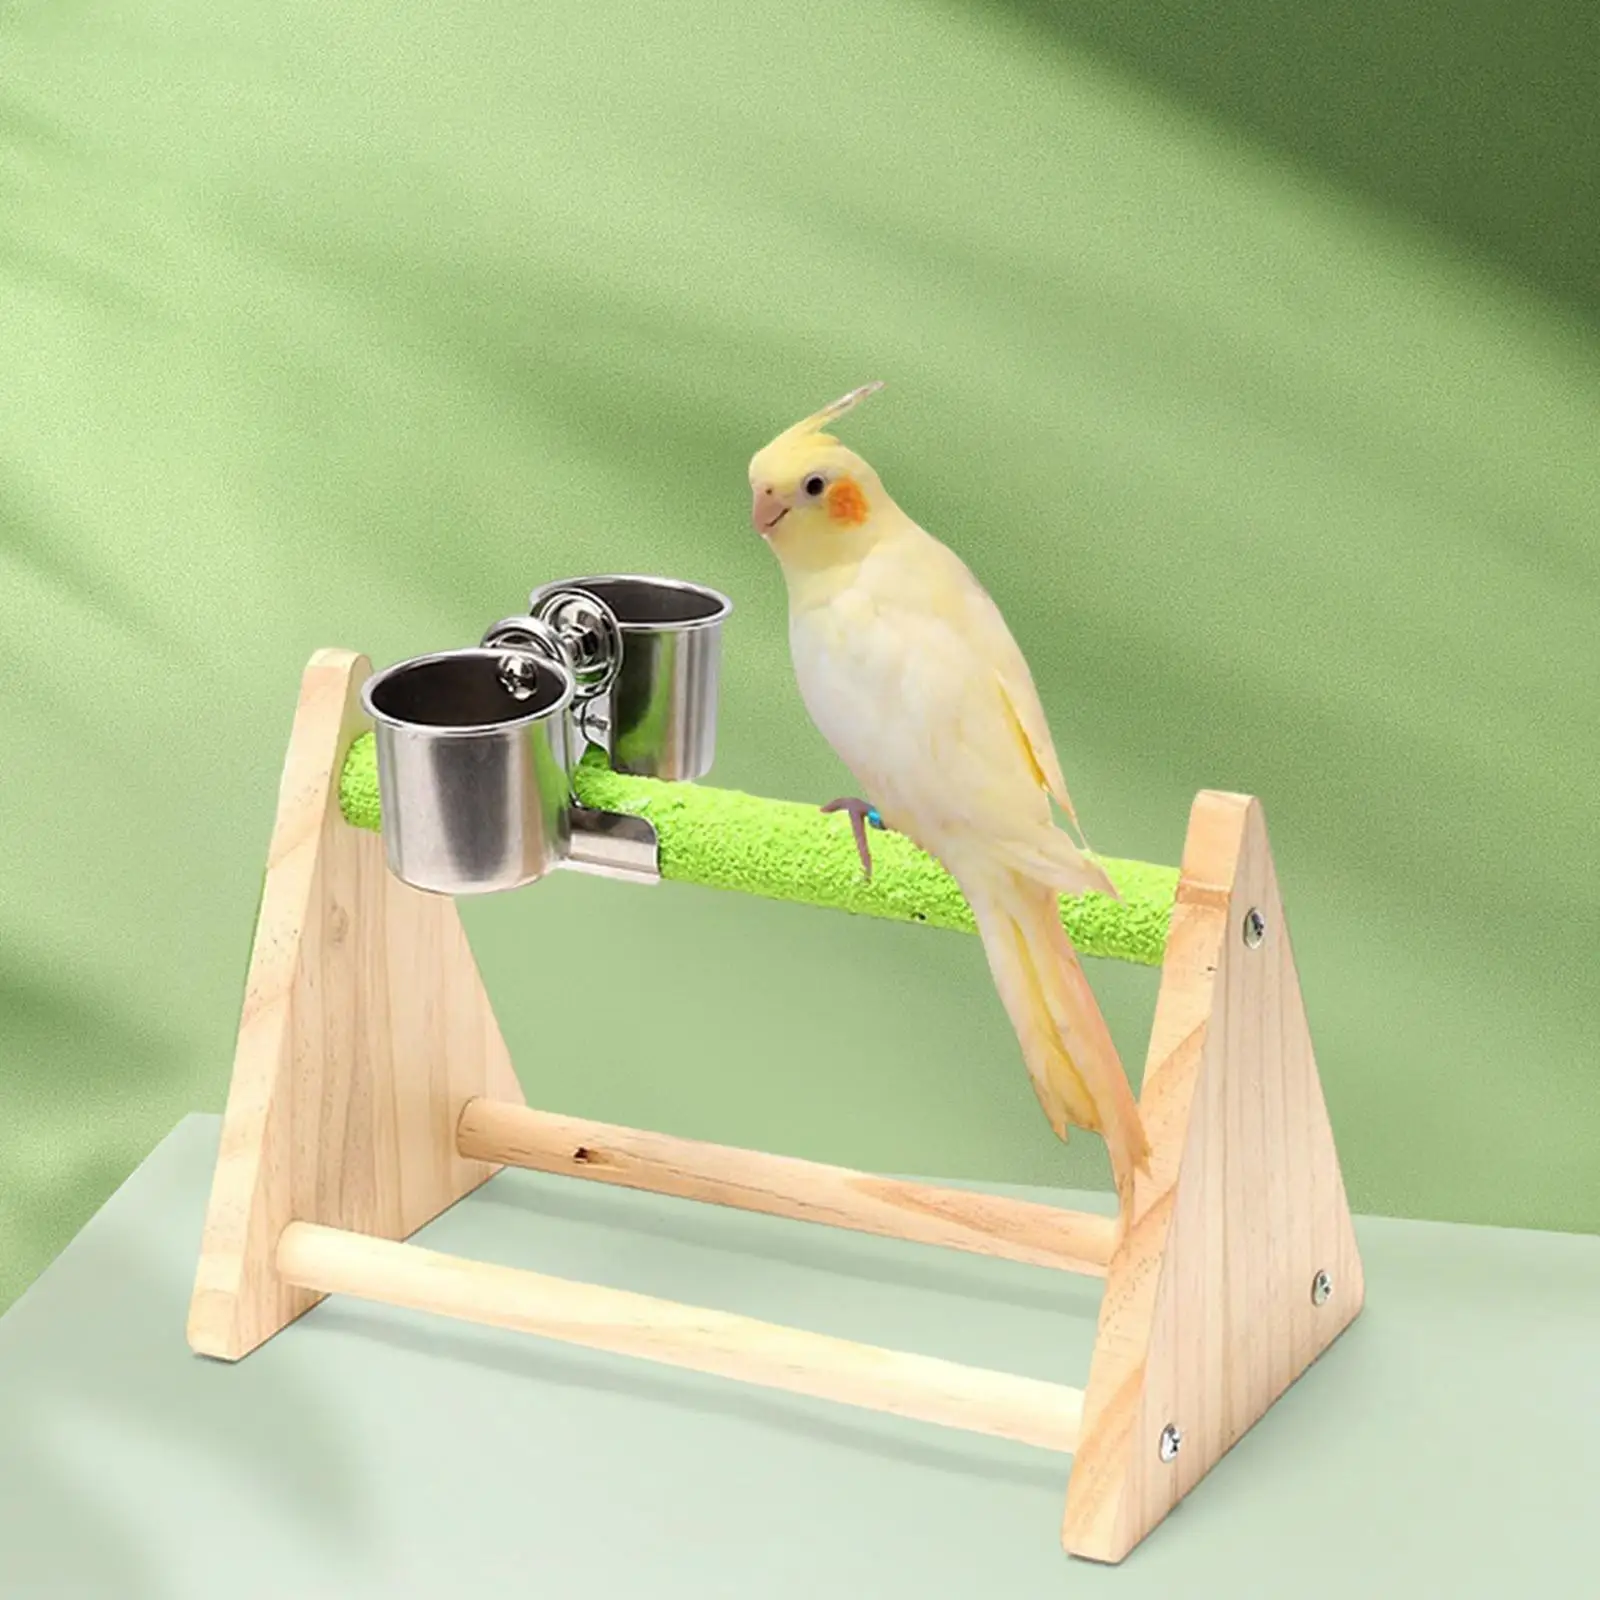 Parrot Playstand with Feeder Cup Roosting Grinding Perch Activity Play Center Bird Feeder stands for Large Bird Finch